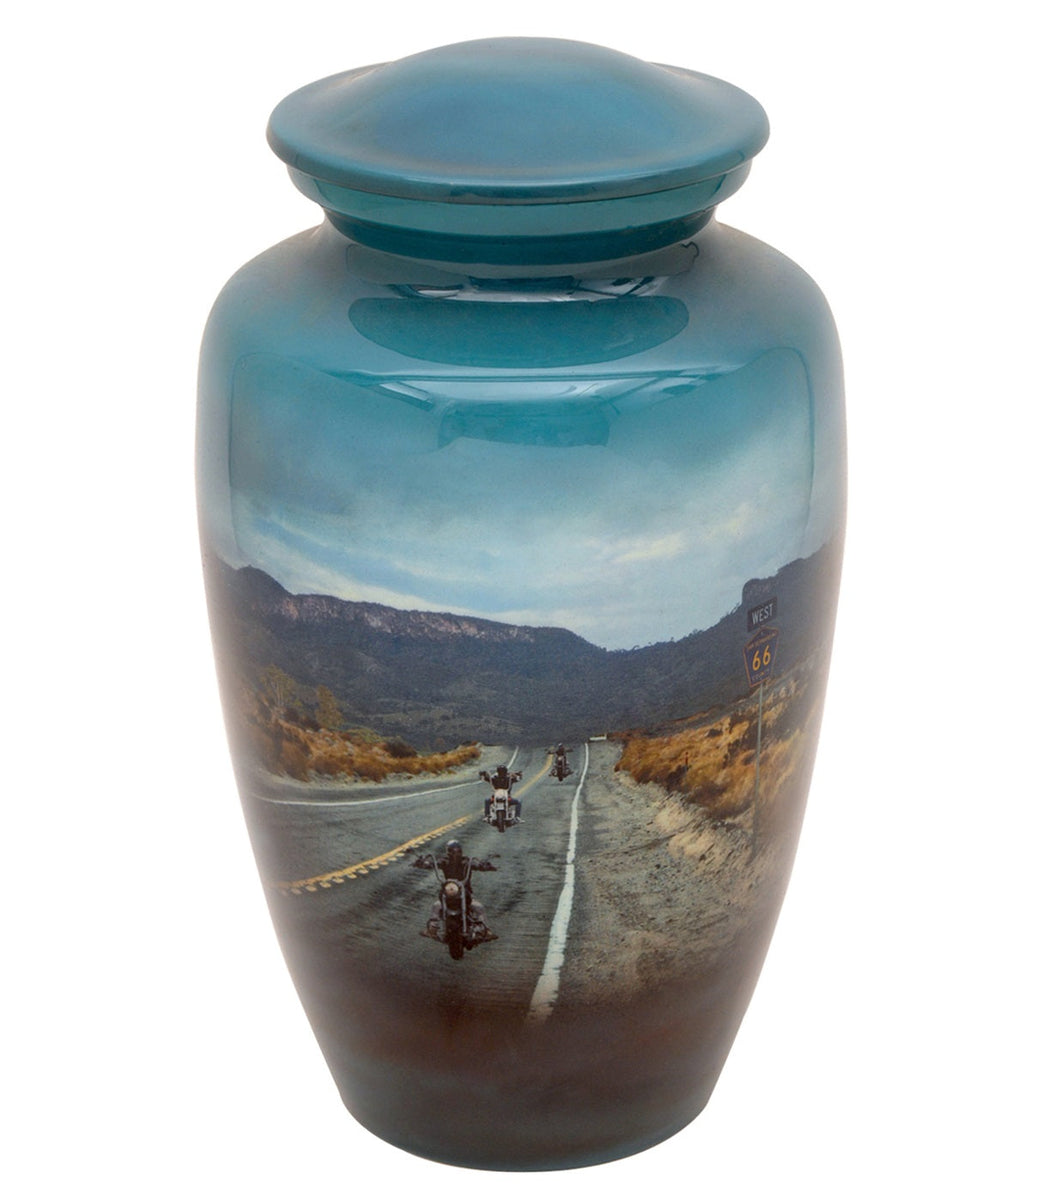 Last Motorcycle Ride Adult Cremation Urn - ExquisiteUrns